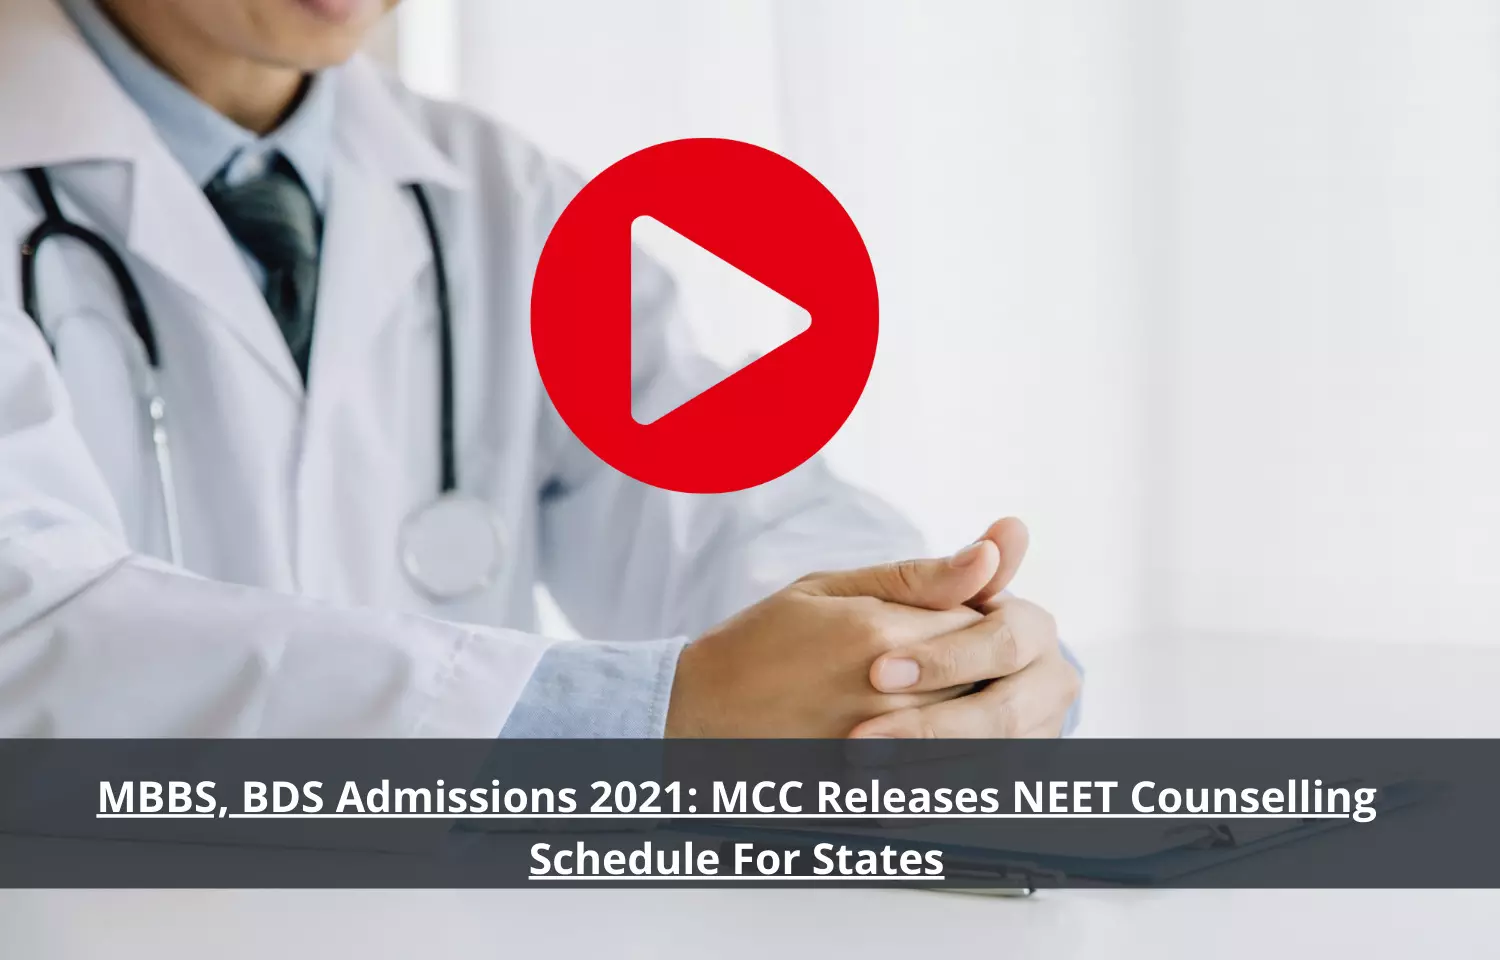 MCC releases NEET counselling schedule for states, details